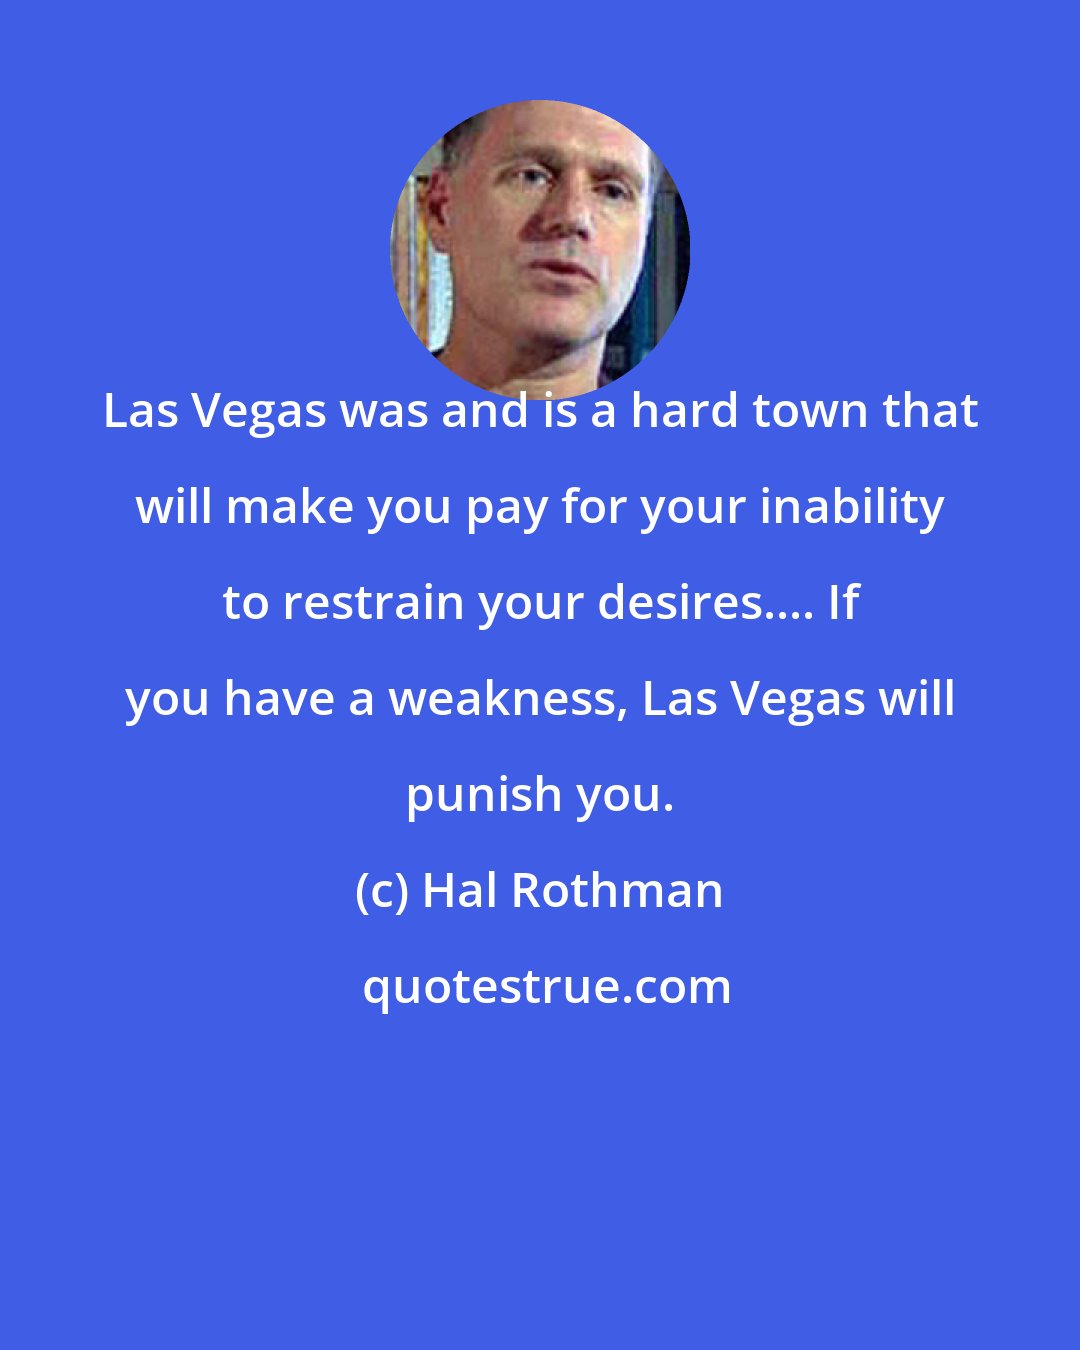 Hal Rothman: Las Vegas was and is a hard town that will make you pay for your inability to restrain your desires.... If you have a weakness, Las Vegas will punish you.